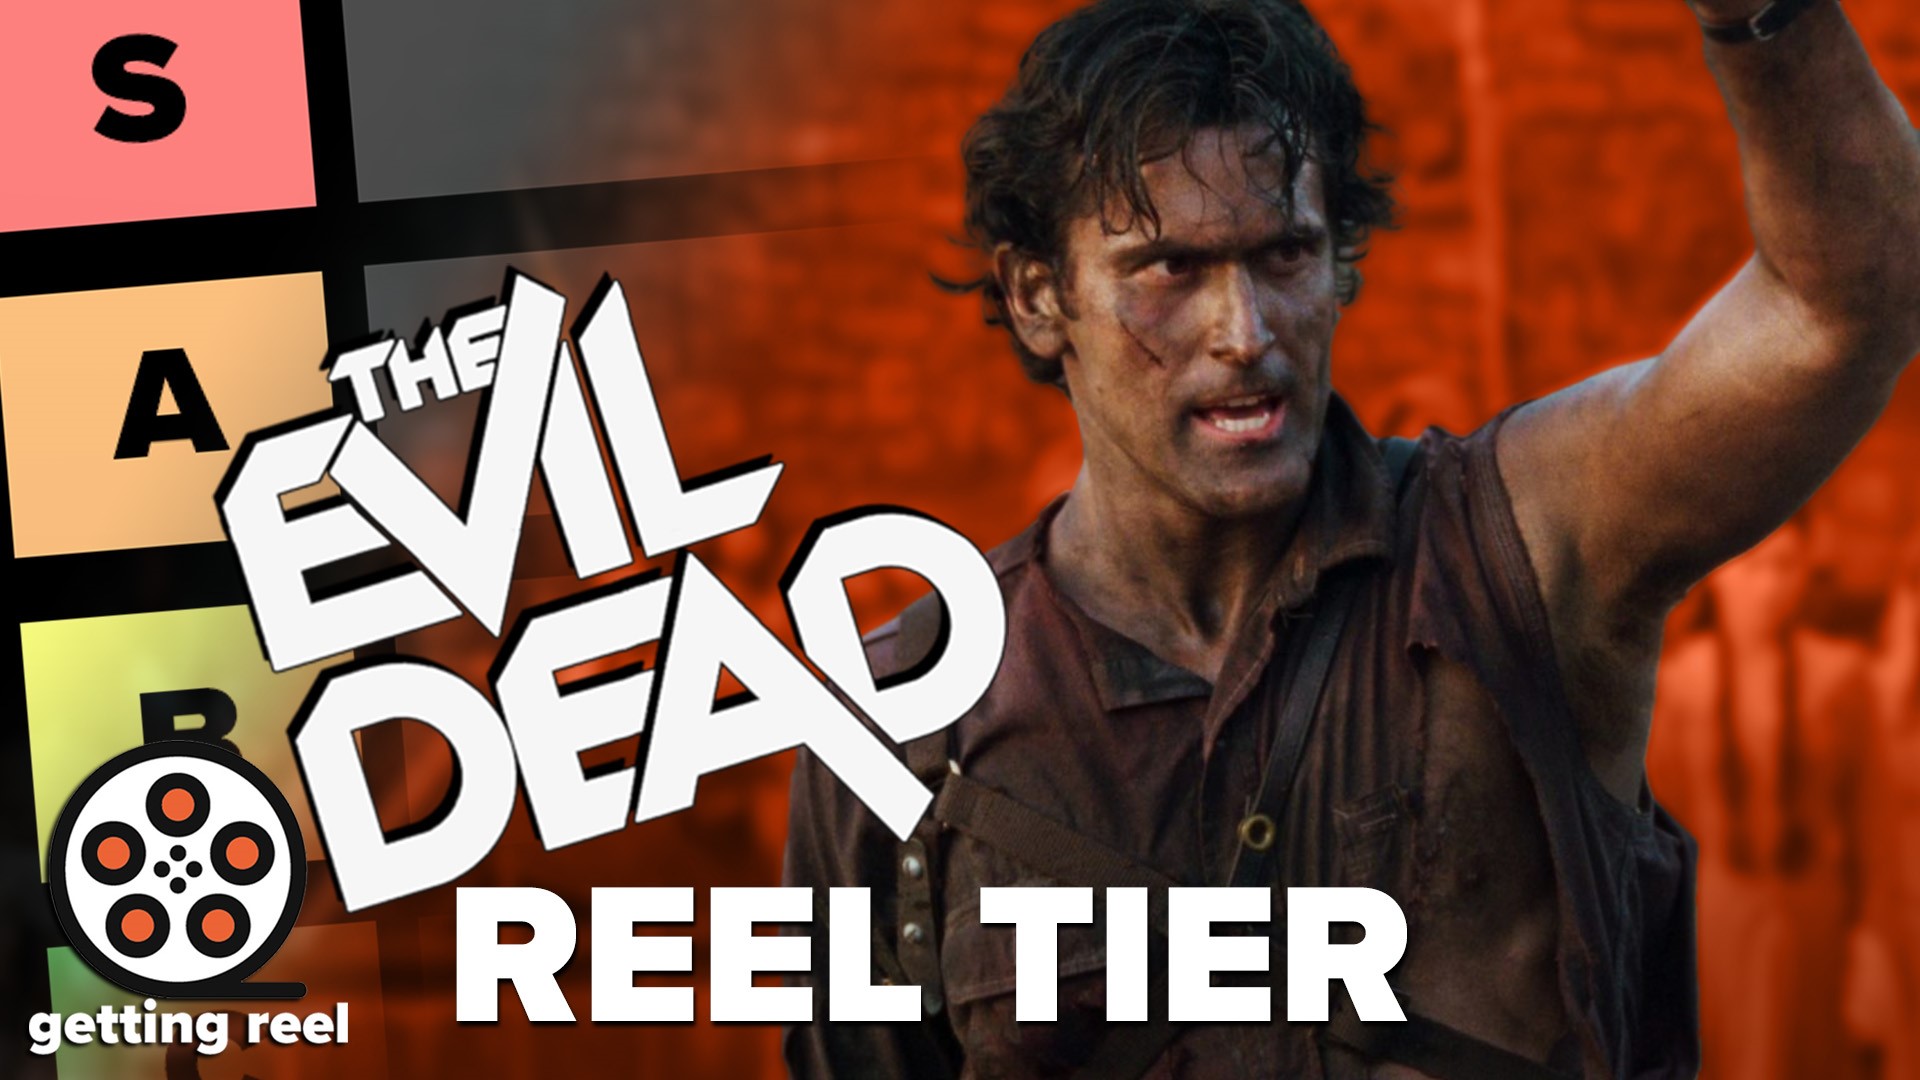 Every Evil Dead movie from best to worst, Reel Tiers